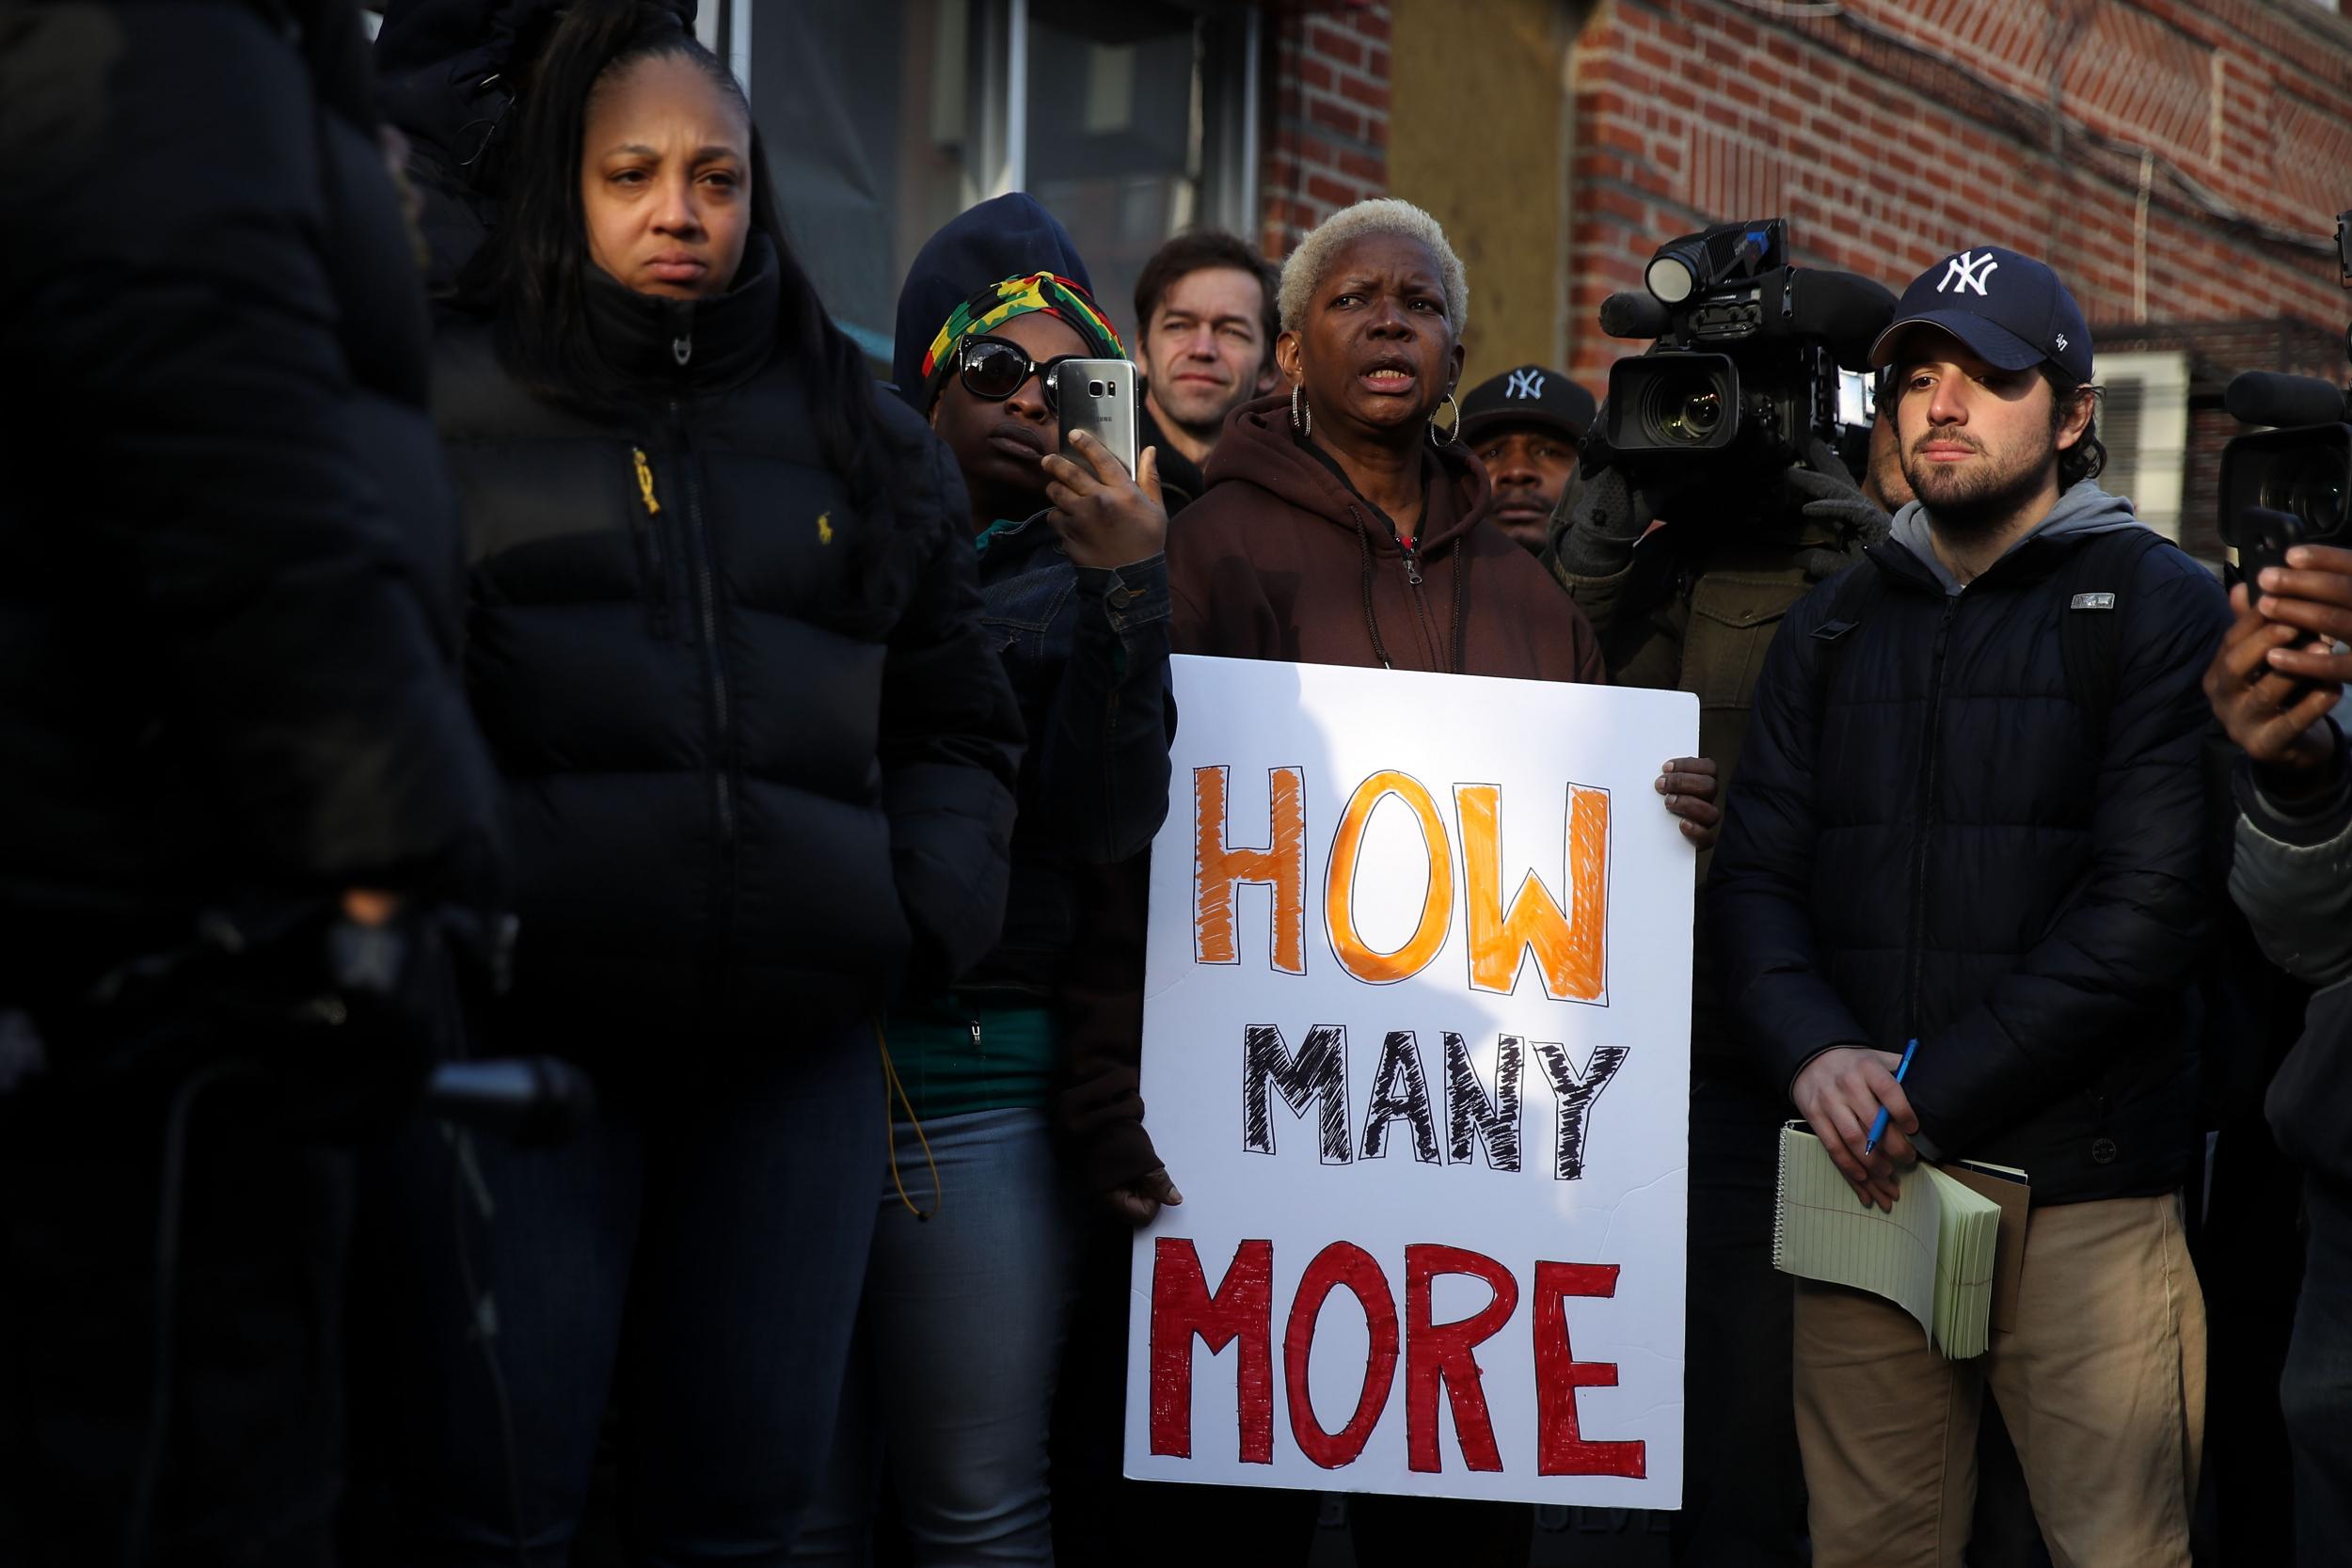 Demonstrators rally in protest of the police-involved shooting death of Saheed Vassell in New York